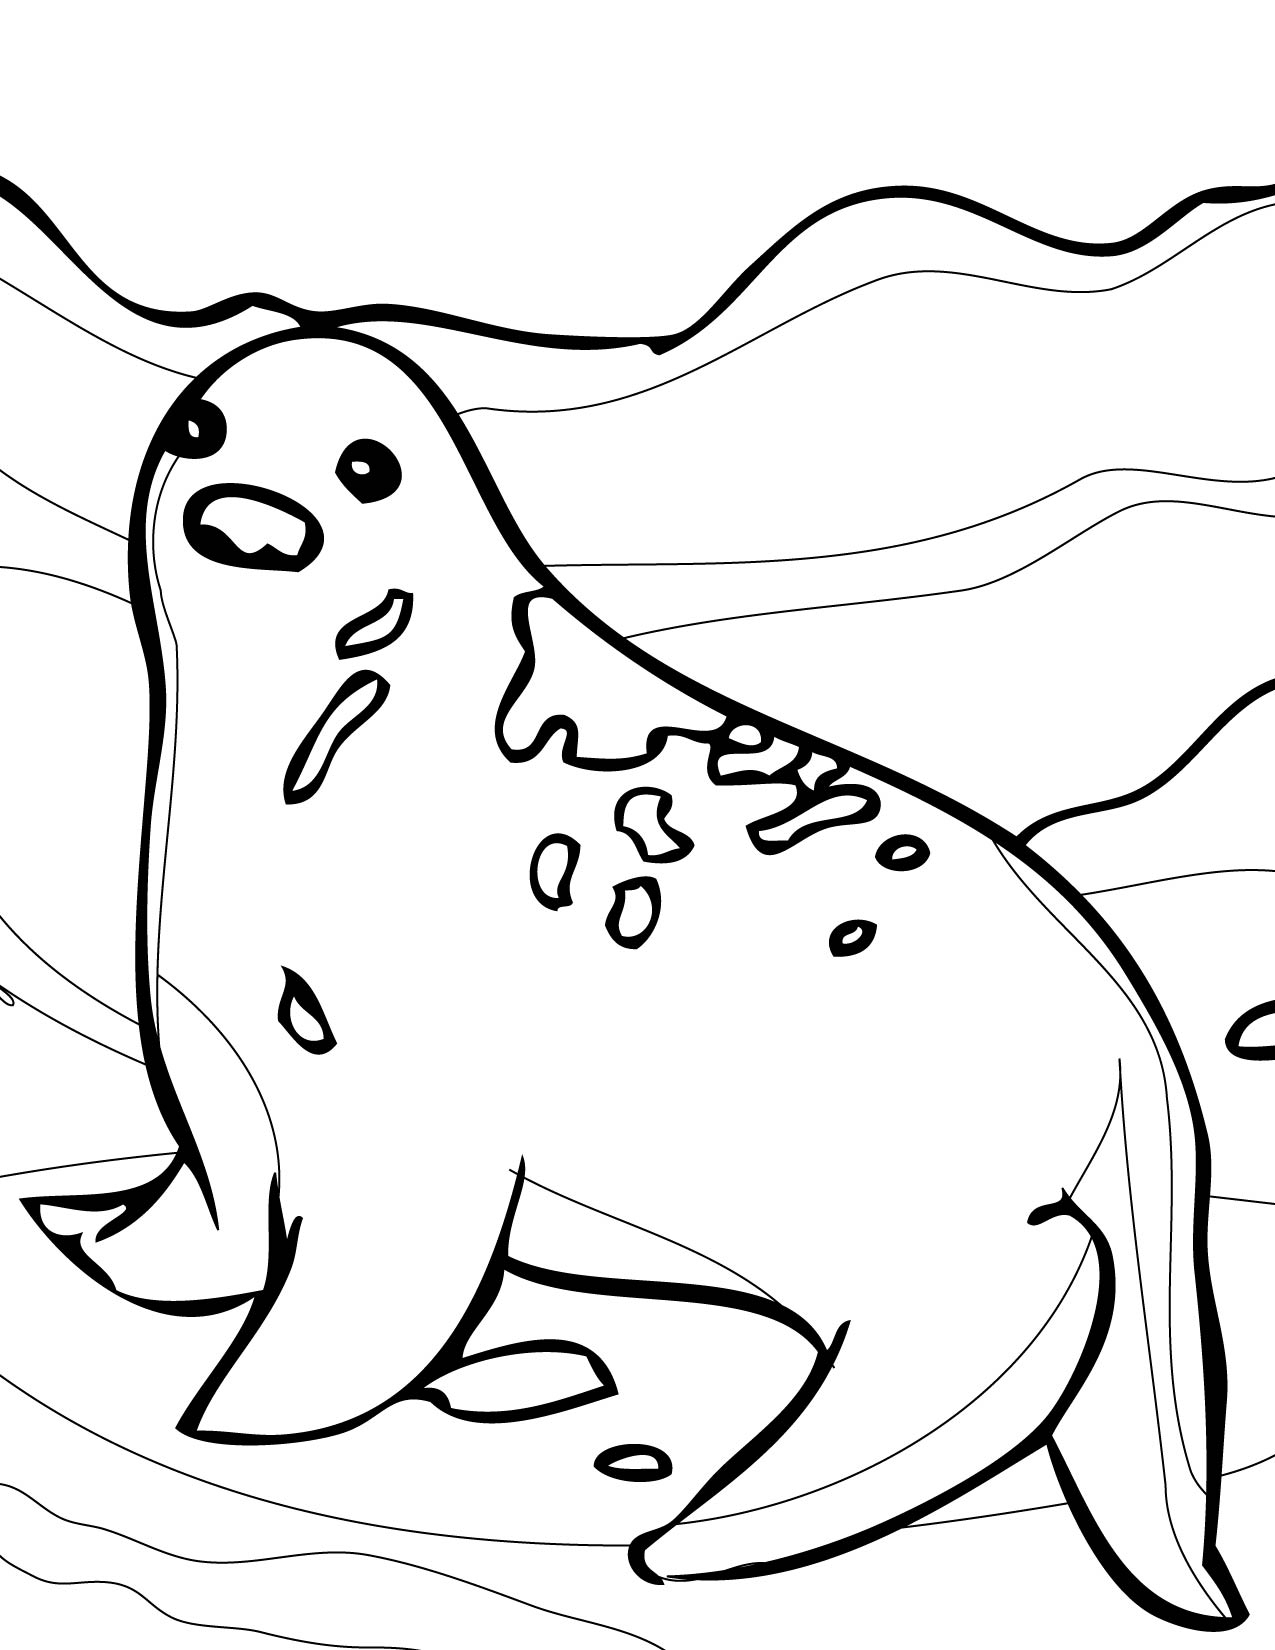 Arctic Animals Coloring Pages at GetColorings.com | Free printable